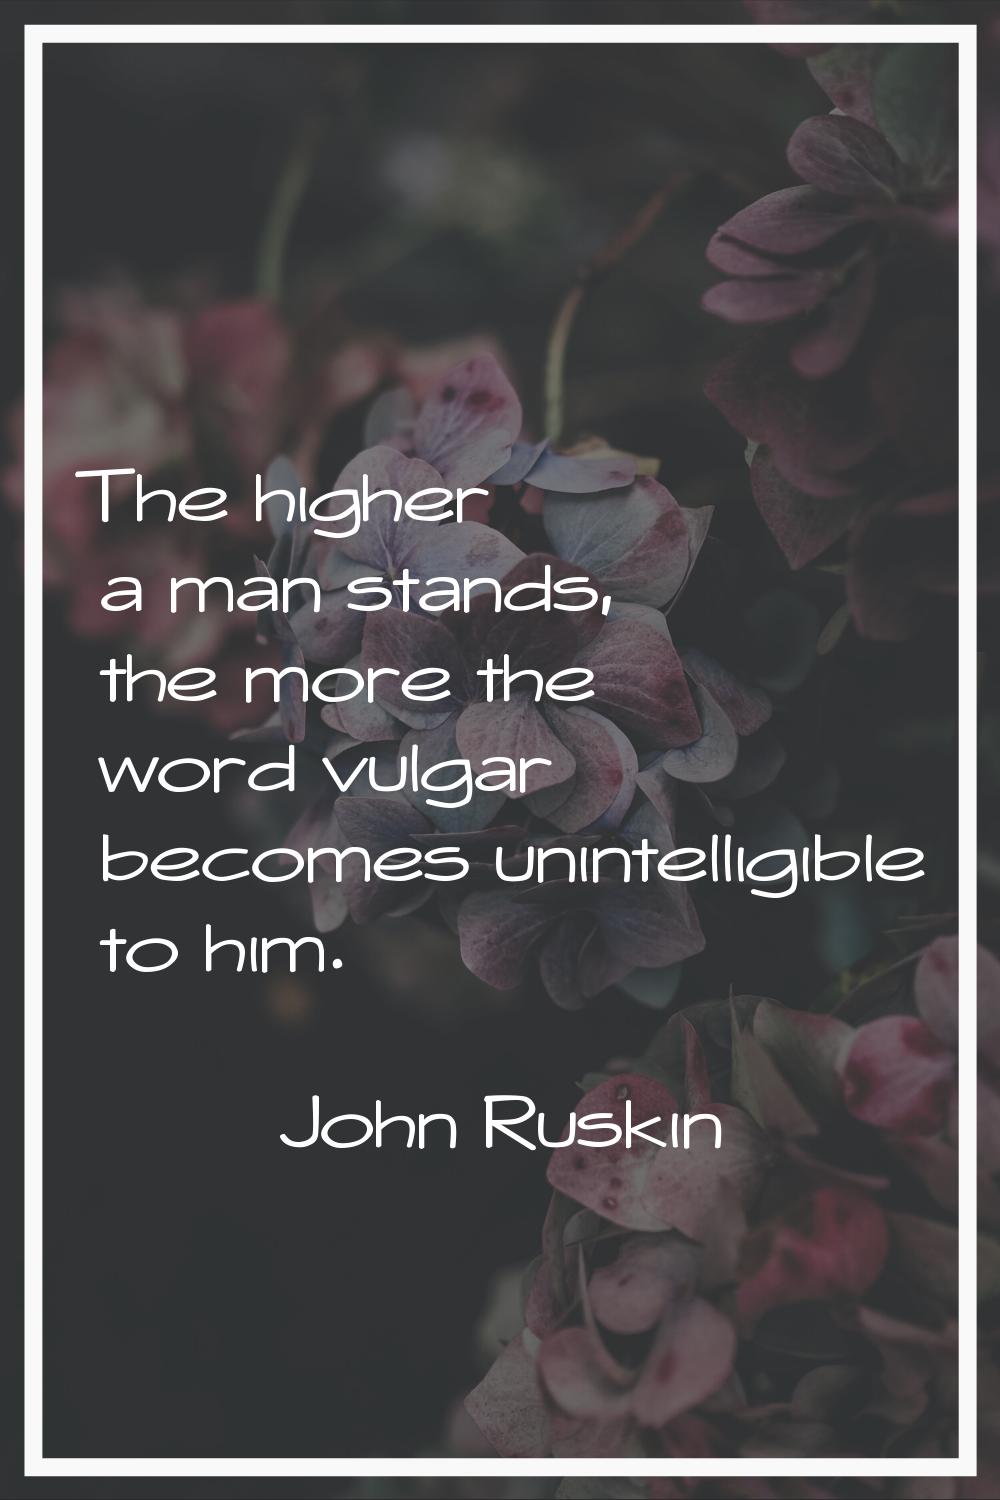 The higher a man stands, the more the word vulgar becomes unintelligible to him.